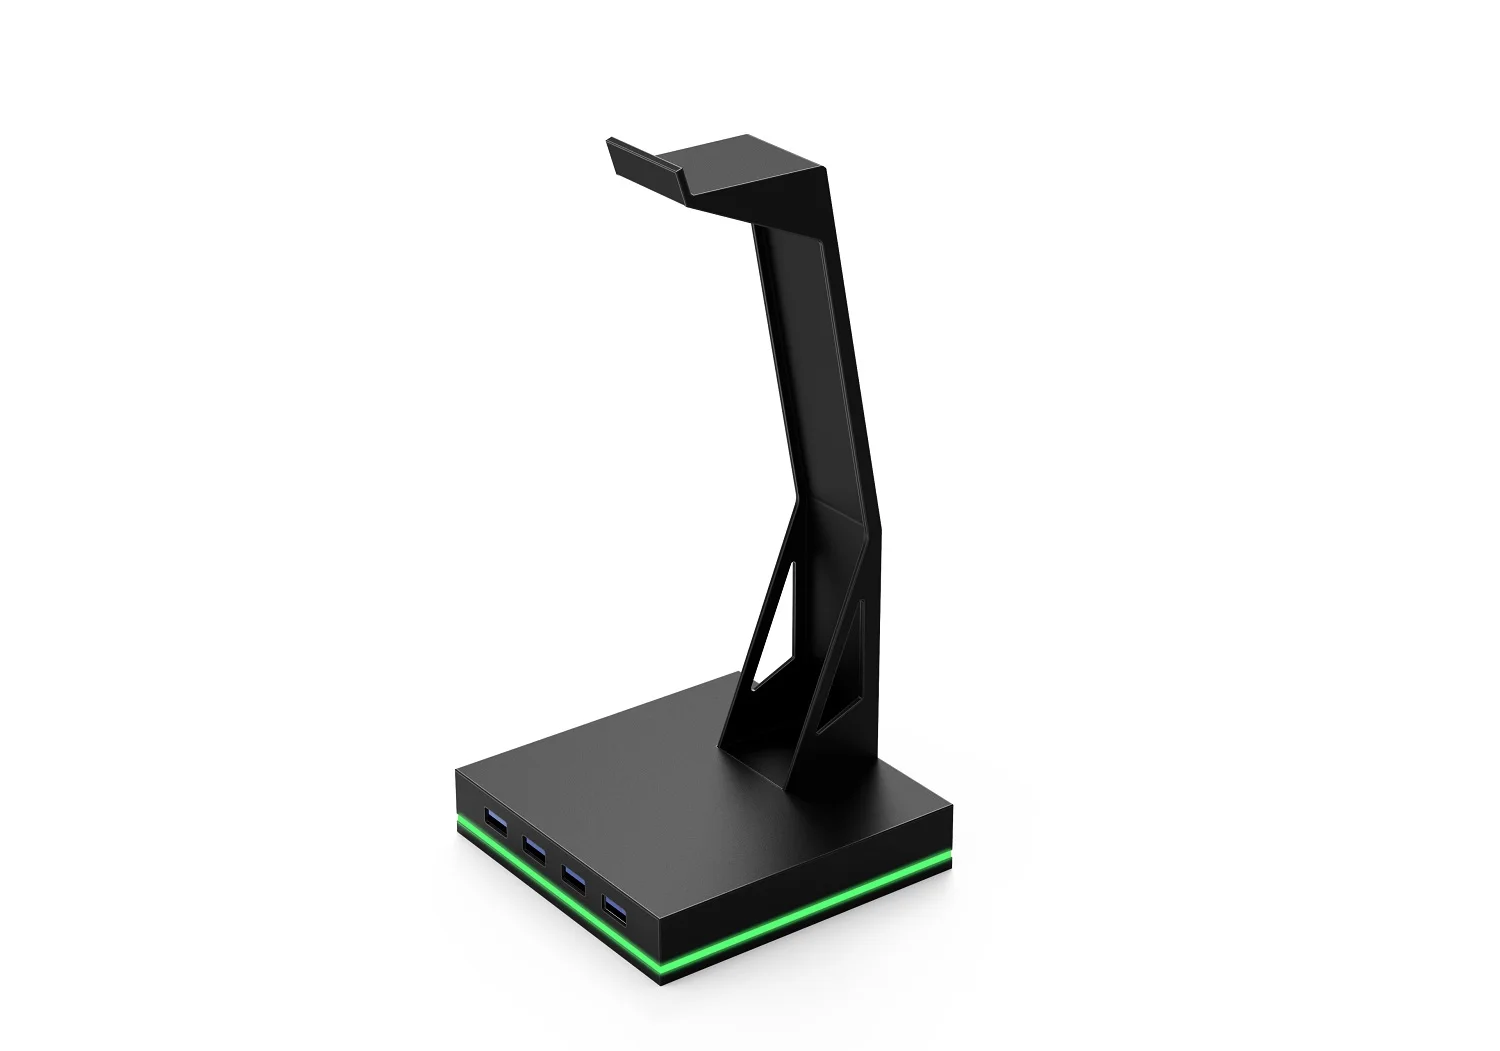 New Arrival Gaming Headset stand with 4 USB 2.0 Ports RGB Headphones Holder for Gamer Gaming PC Accessories Desk